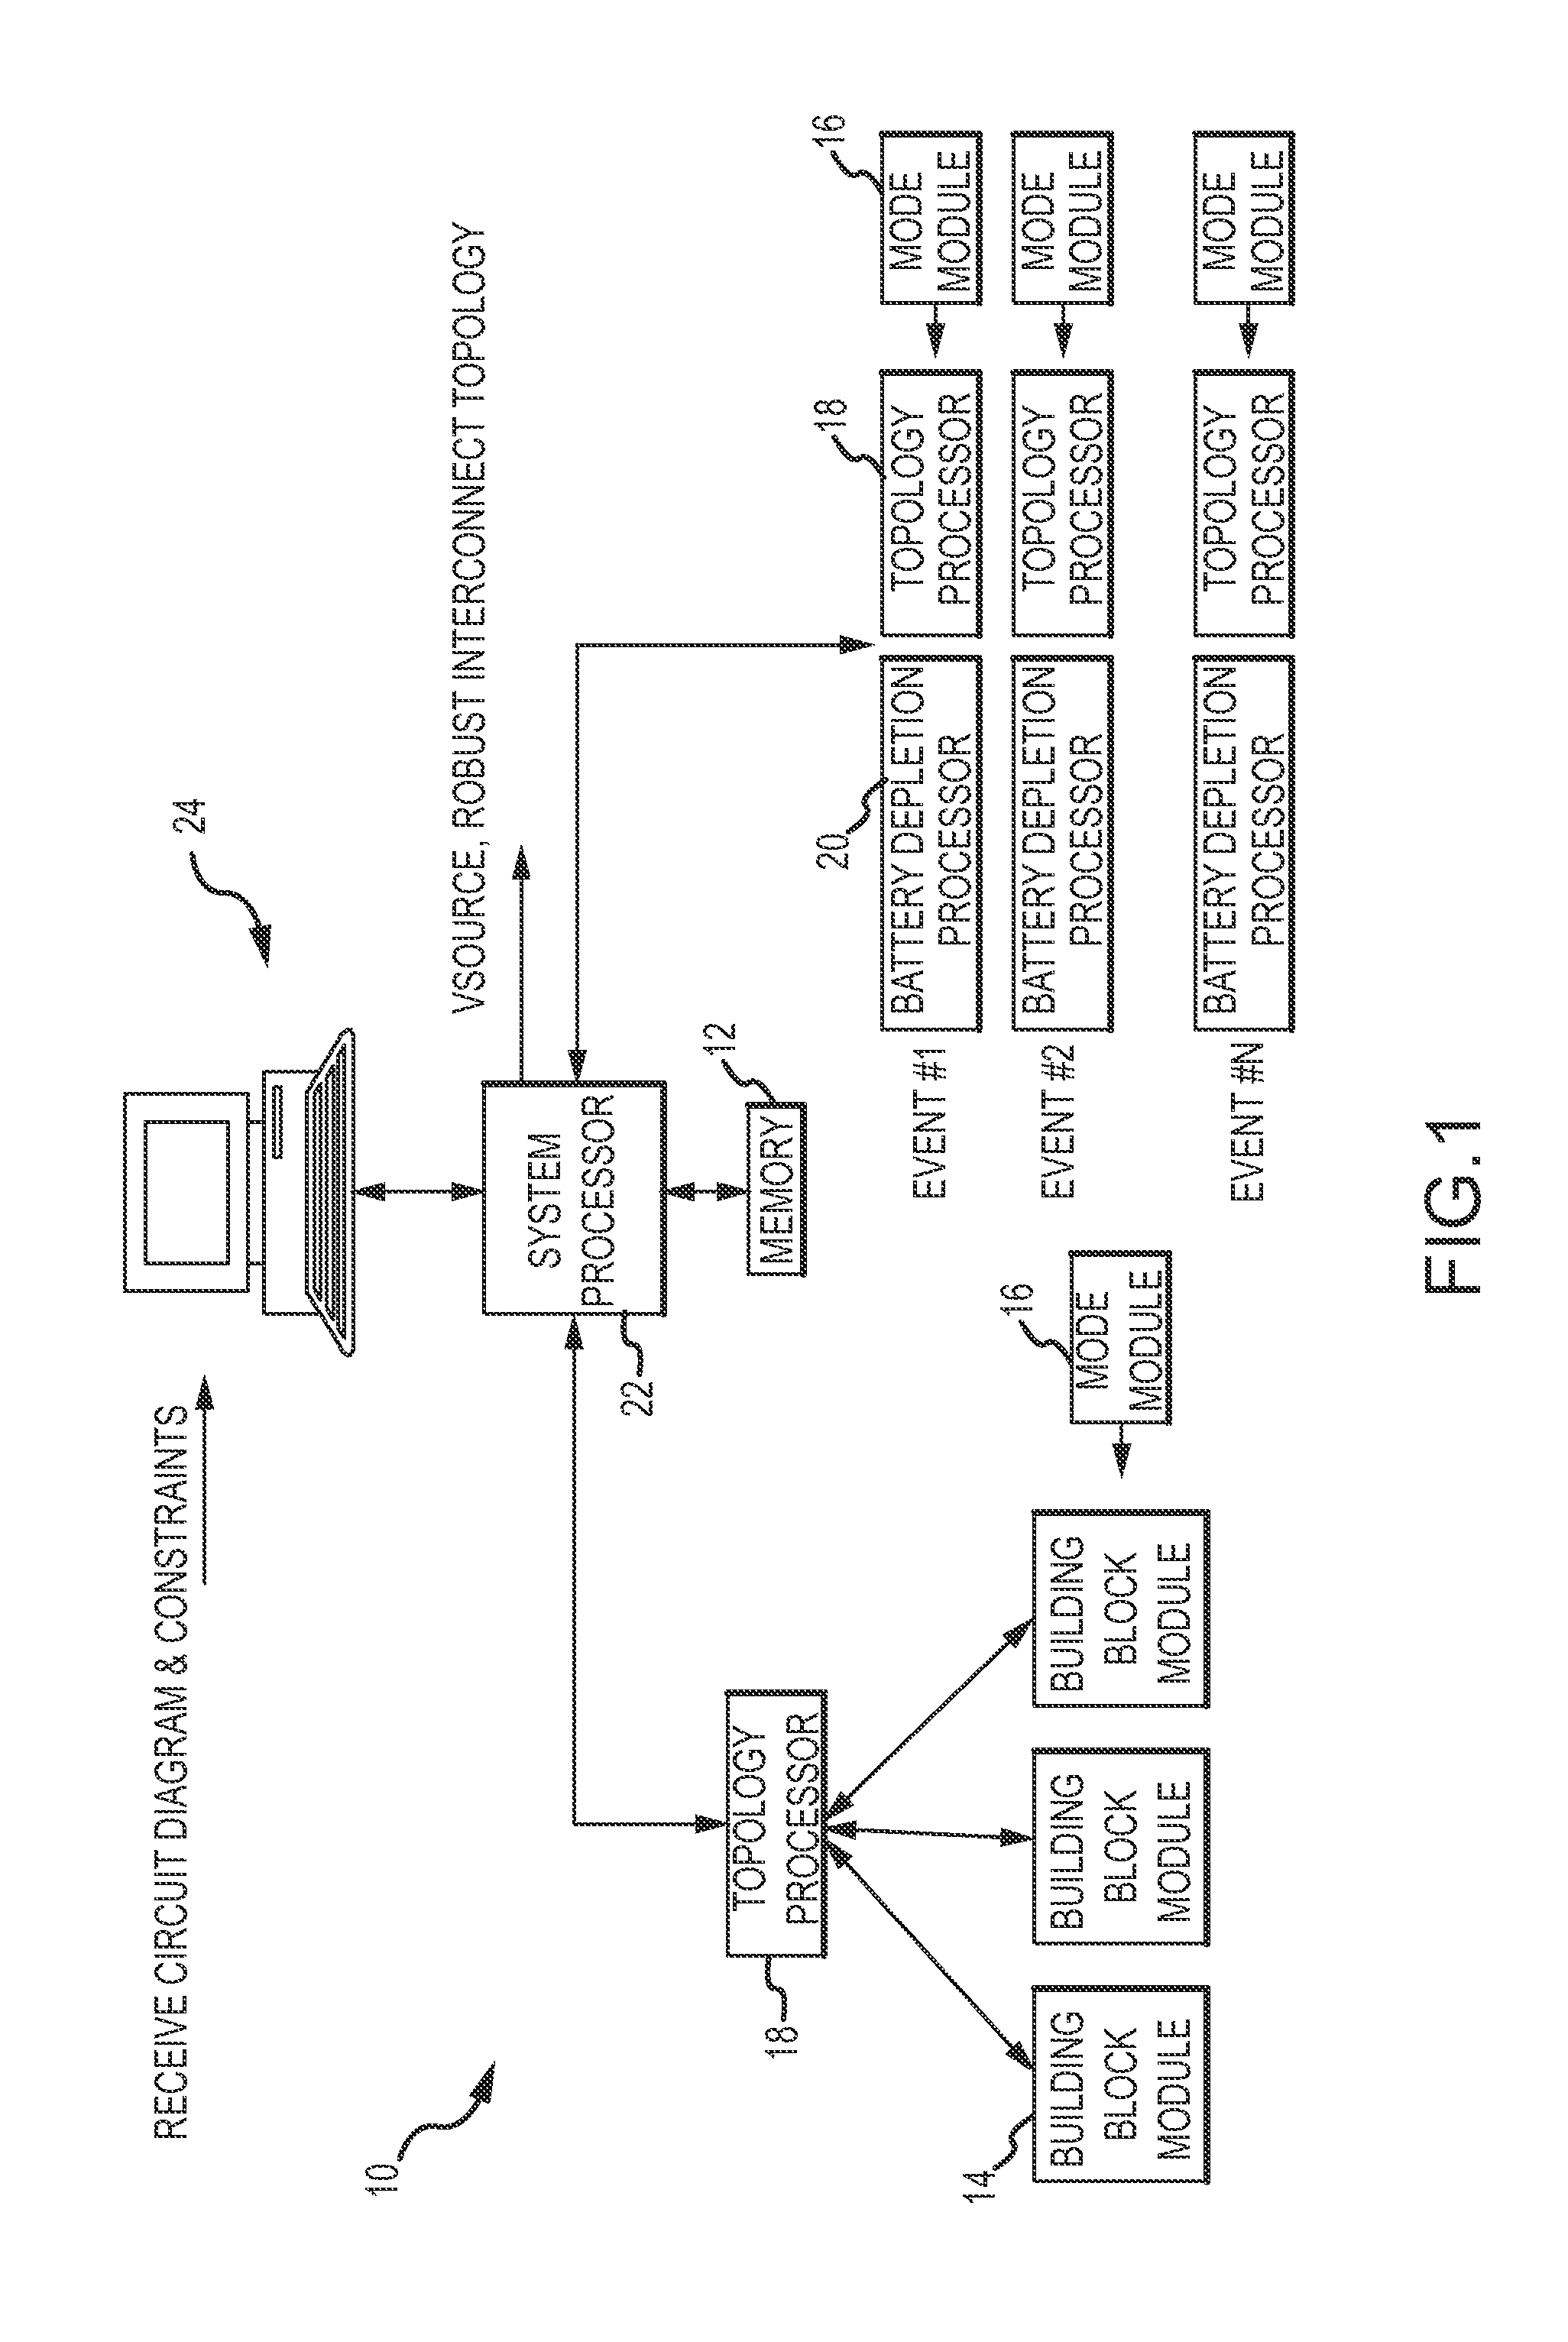 Systems power distribution tool